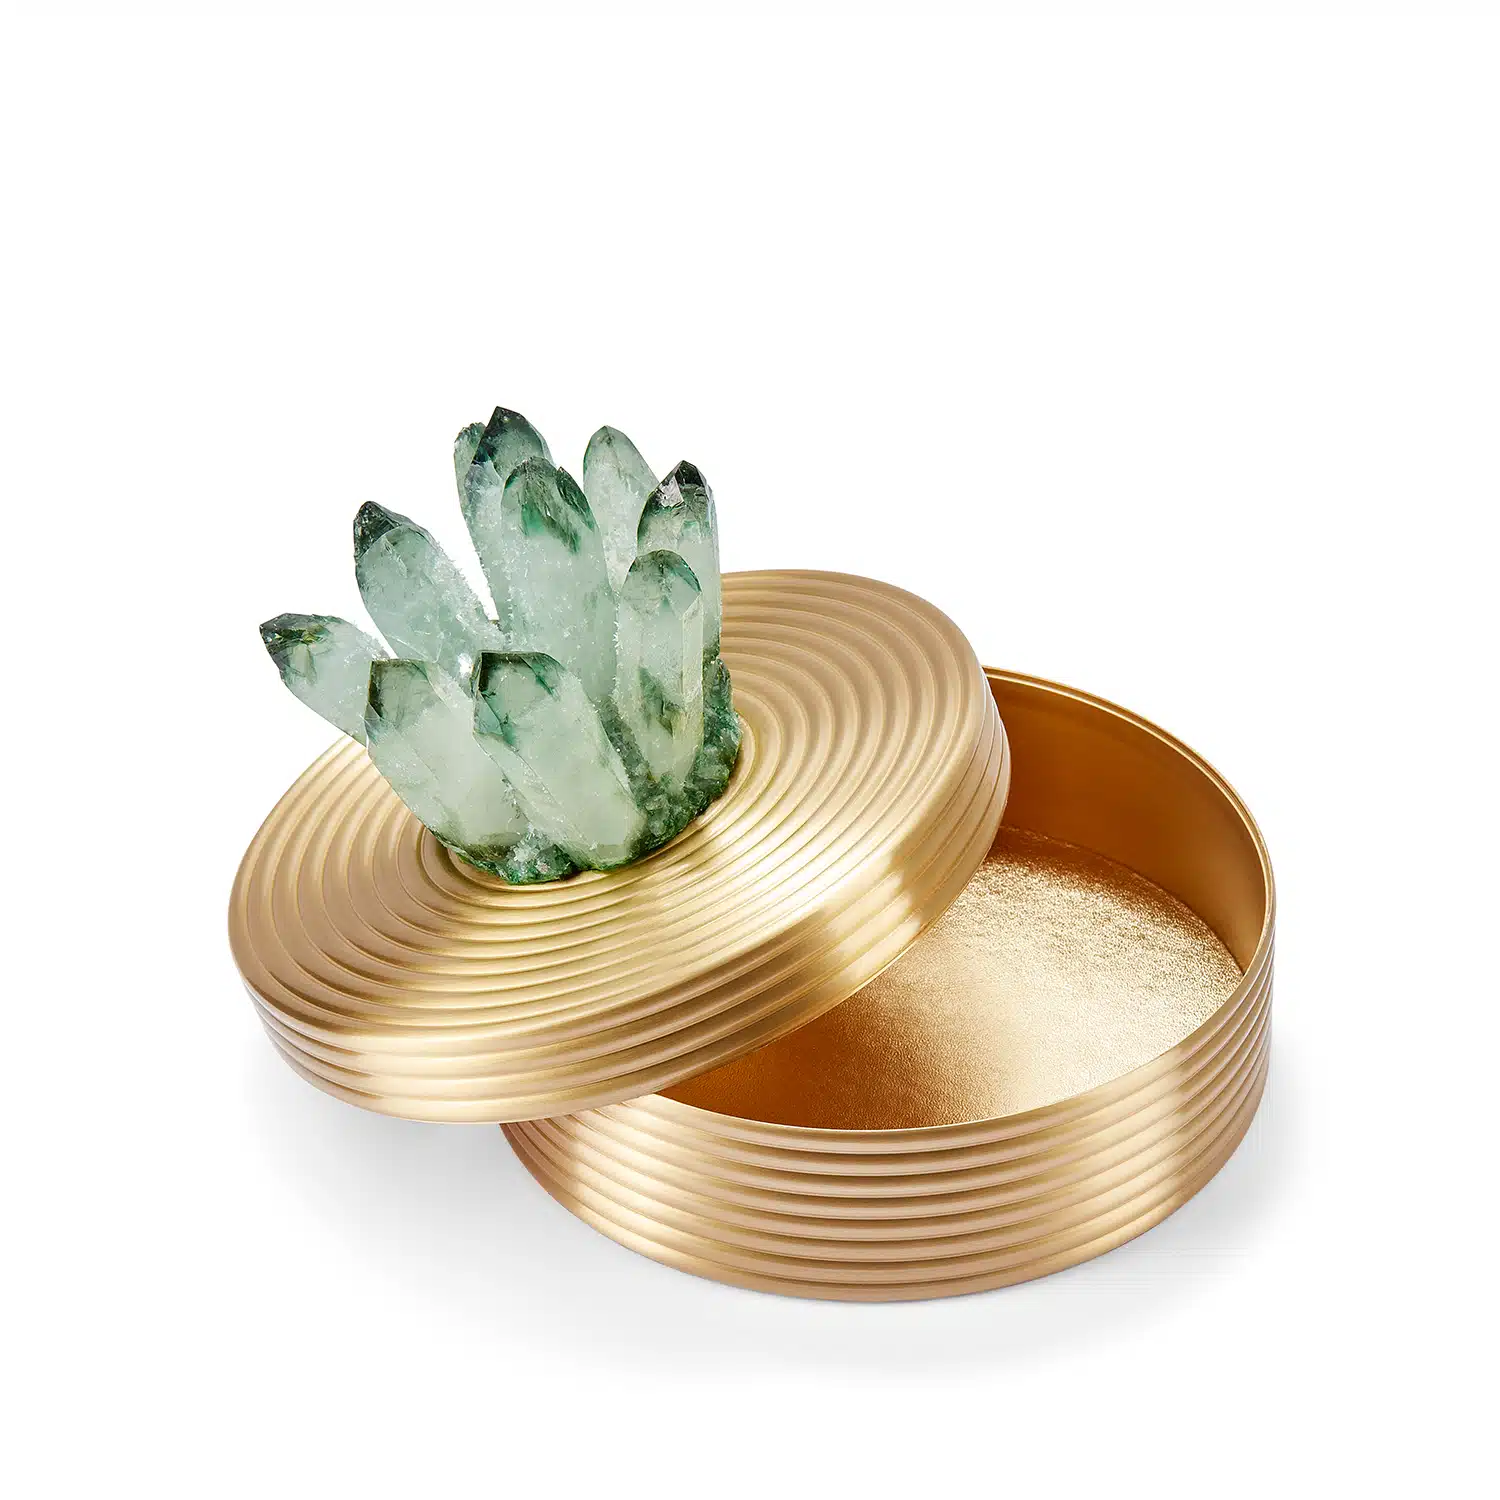 A gorgeous luxury keepsake box adorned with peridot minerals, a luxury home decor piece from the katharine pooley range